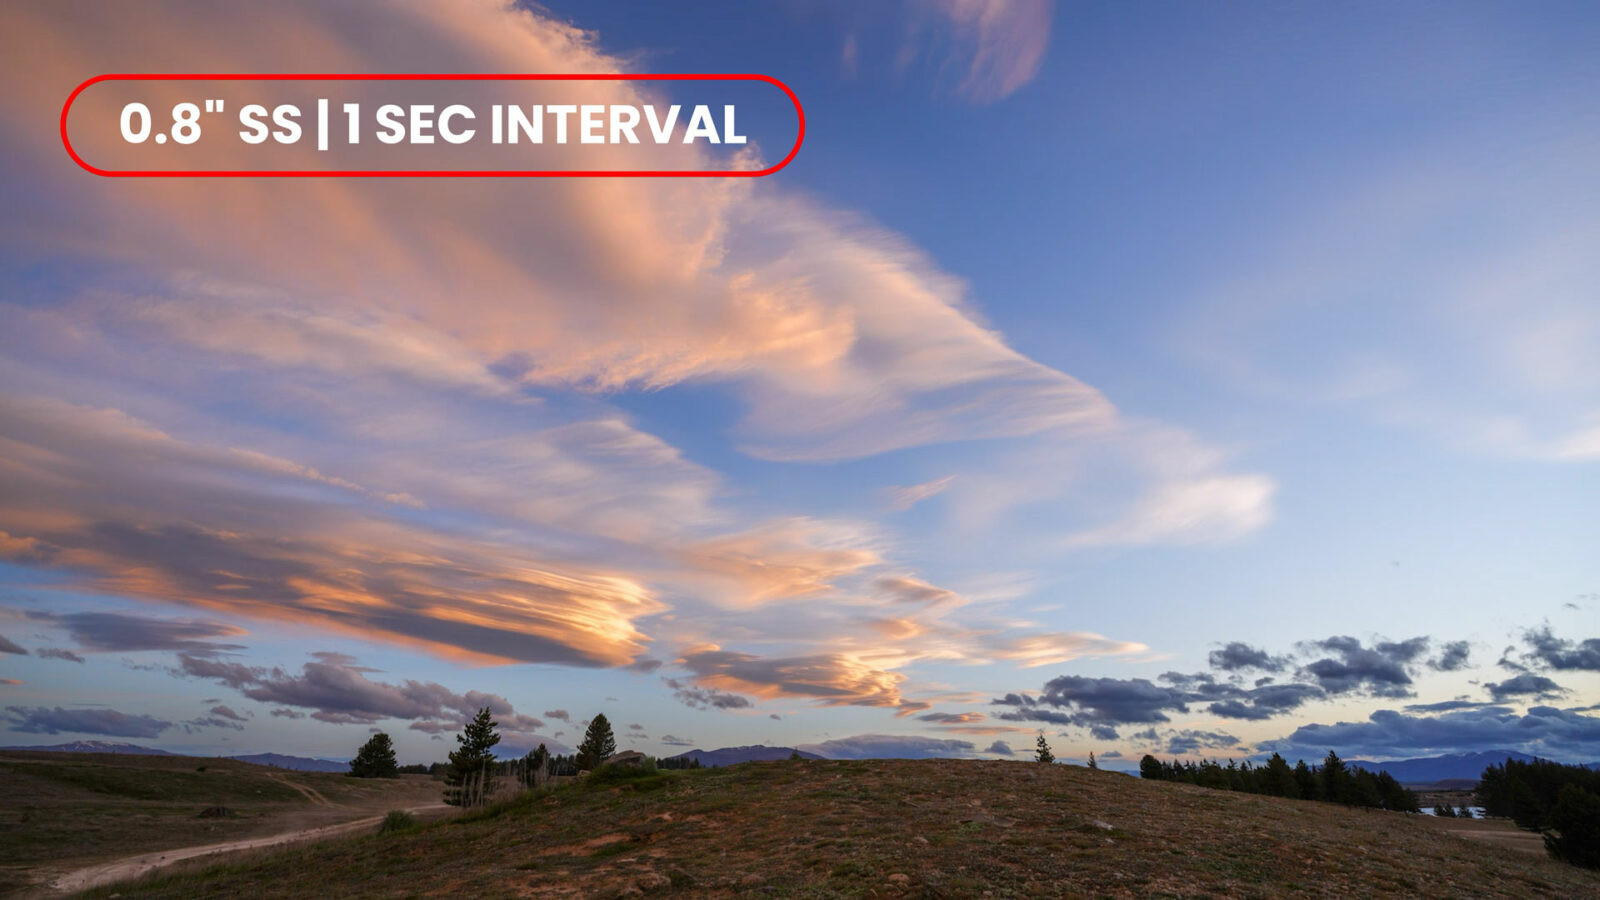 Moving clouds require shorter timelapse intervals. Image source: Drew Geraci / MZed